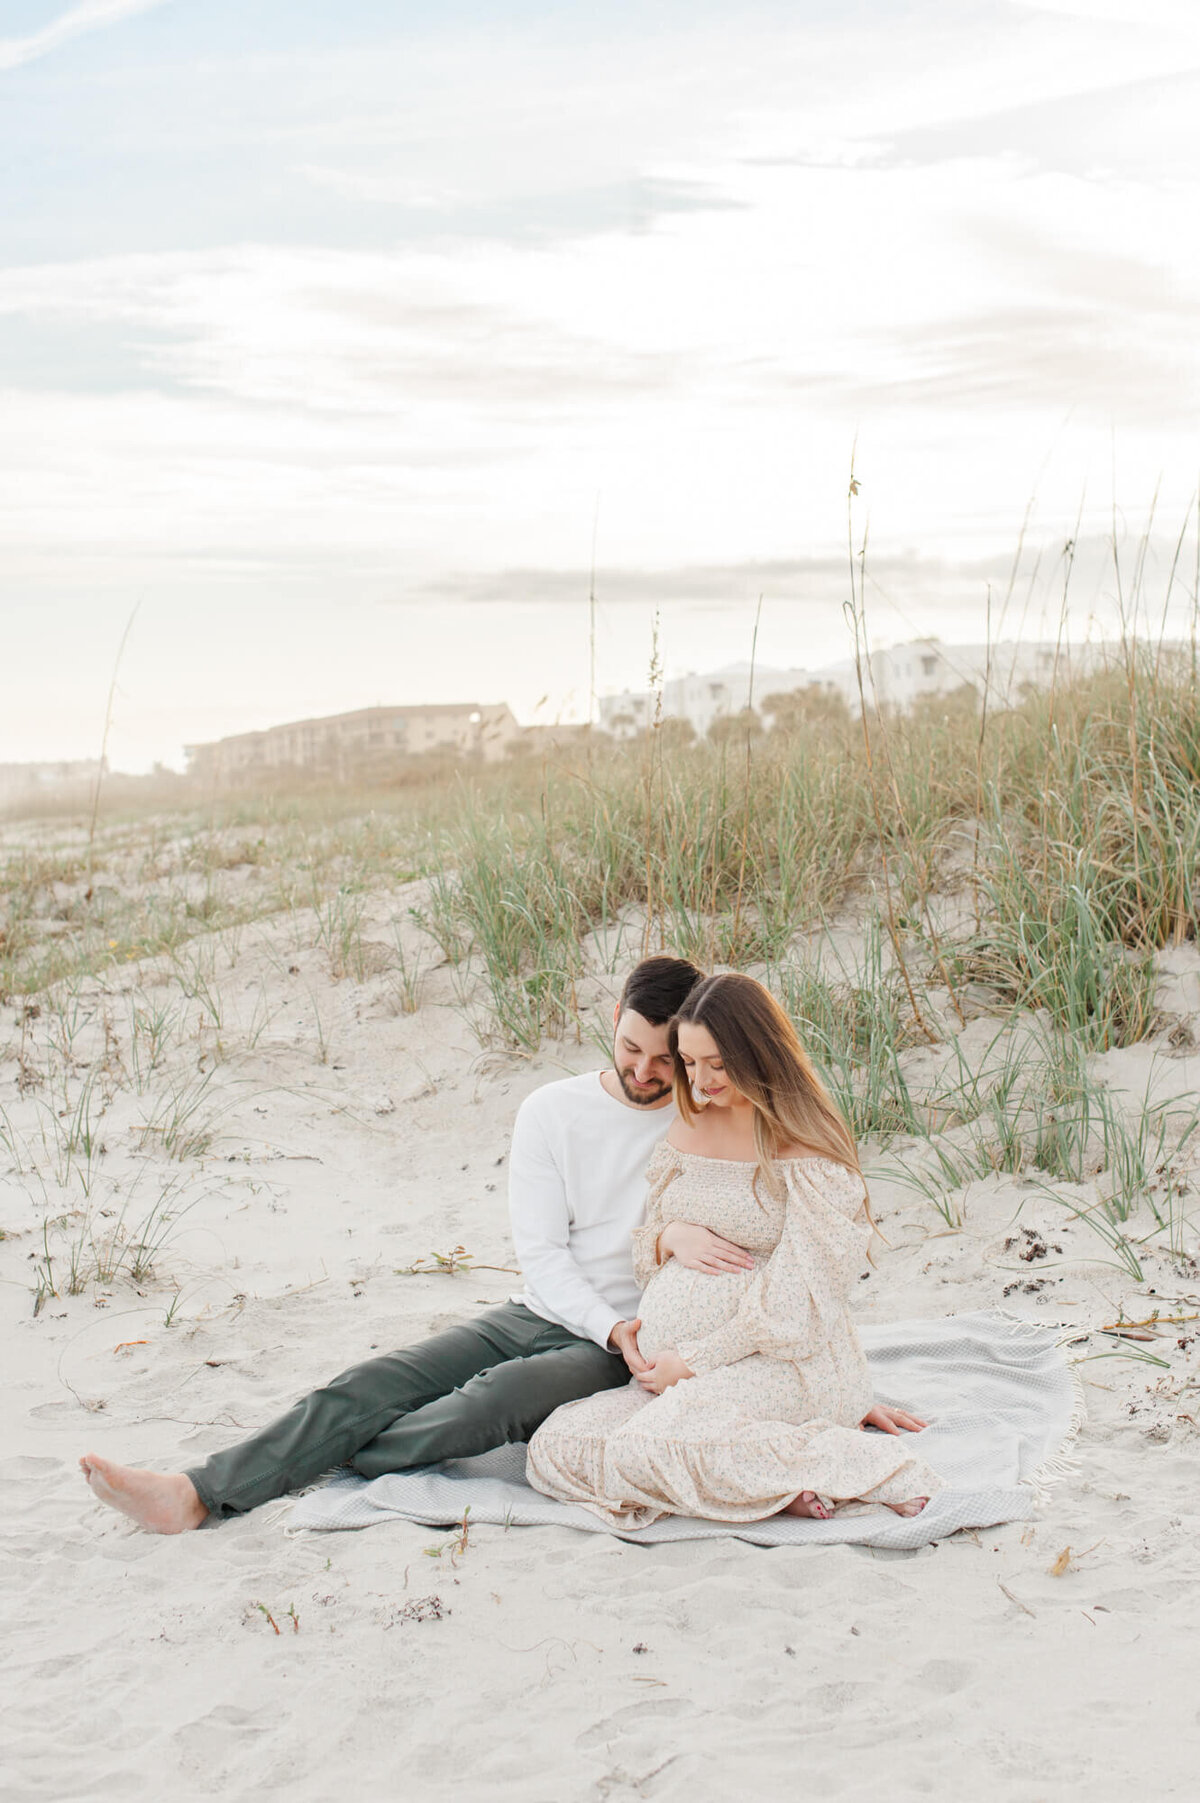 New parents sit in the dunes on a blanket and hold moms pregnant belly